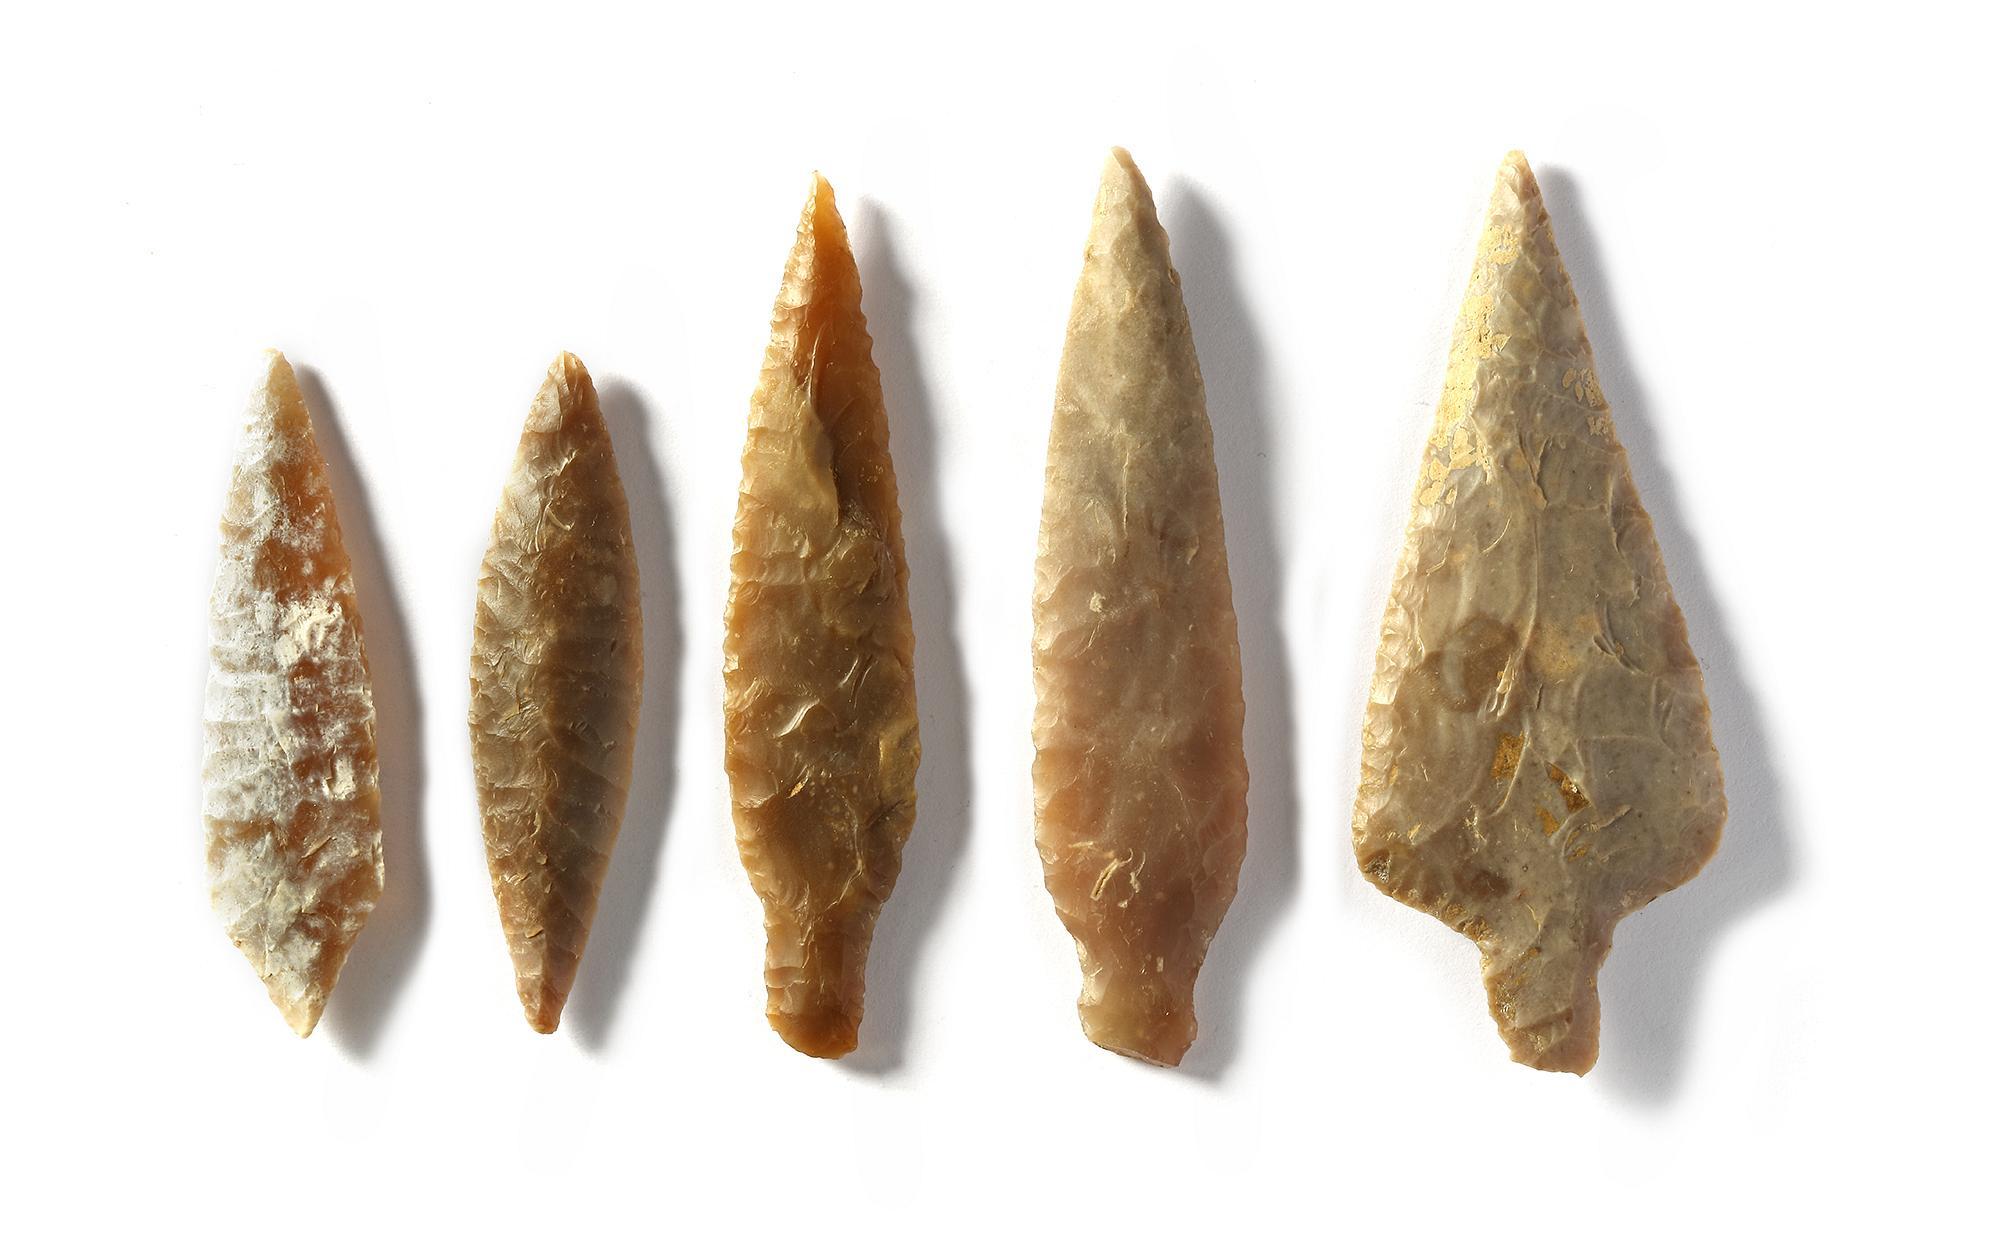 A STONE AGE NEOLITHIC ARROWHEAD COLLECTION, CIRCA 4TH MILLENNIUM B.C. - Image 3 of 3